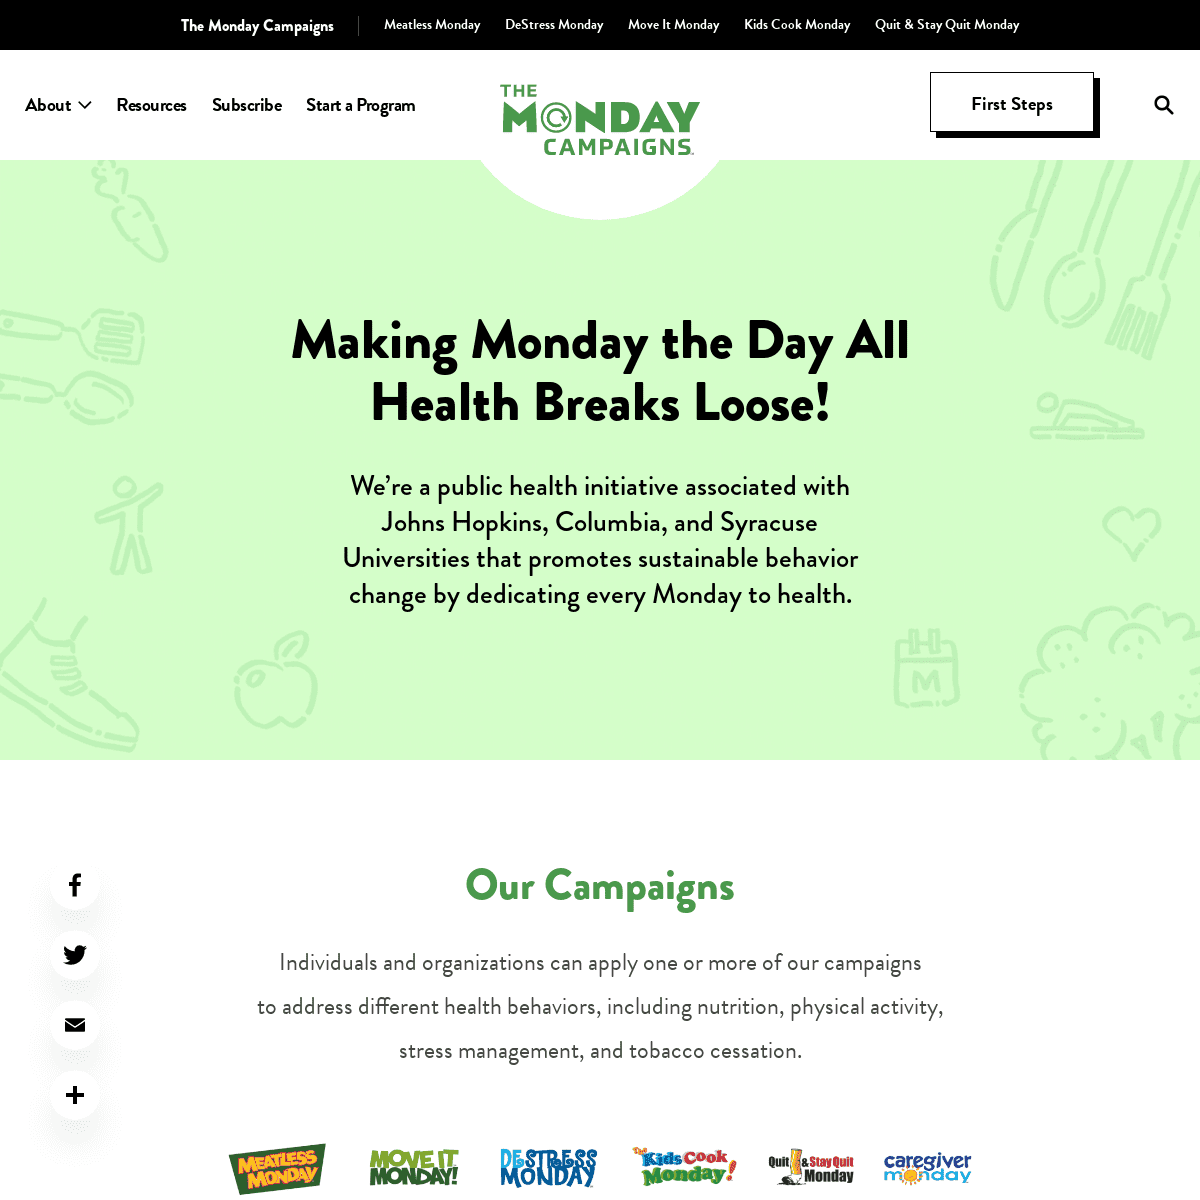 A complete backup of https://mondaycampaigns.org